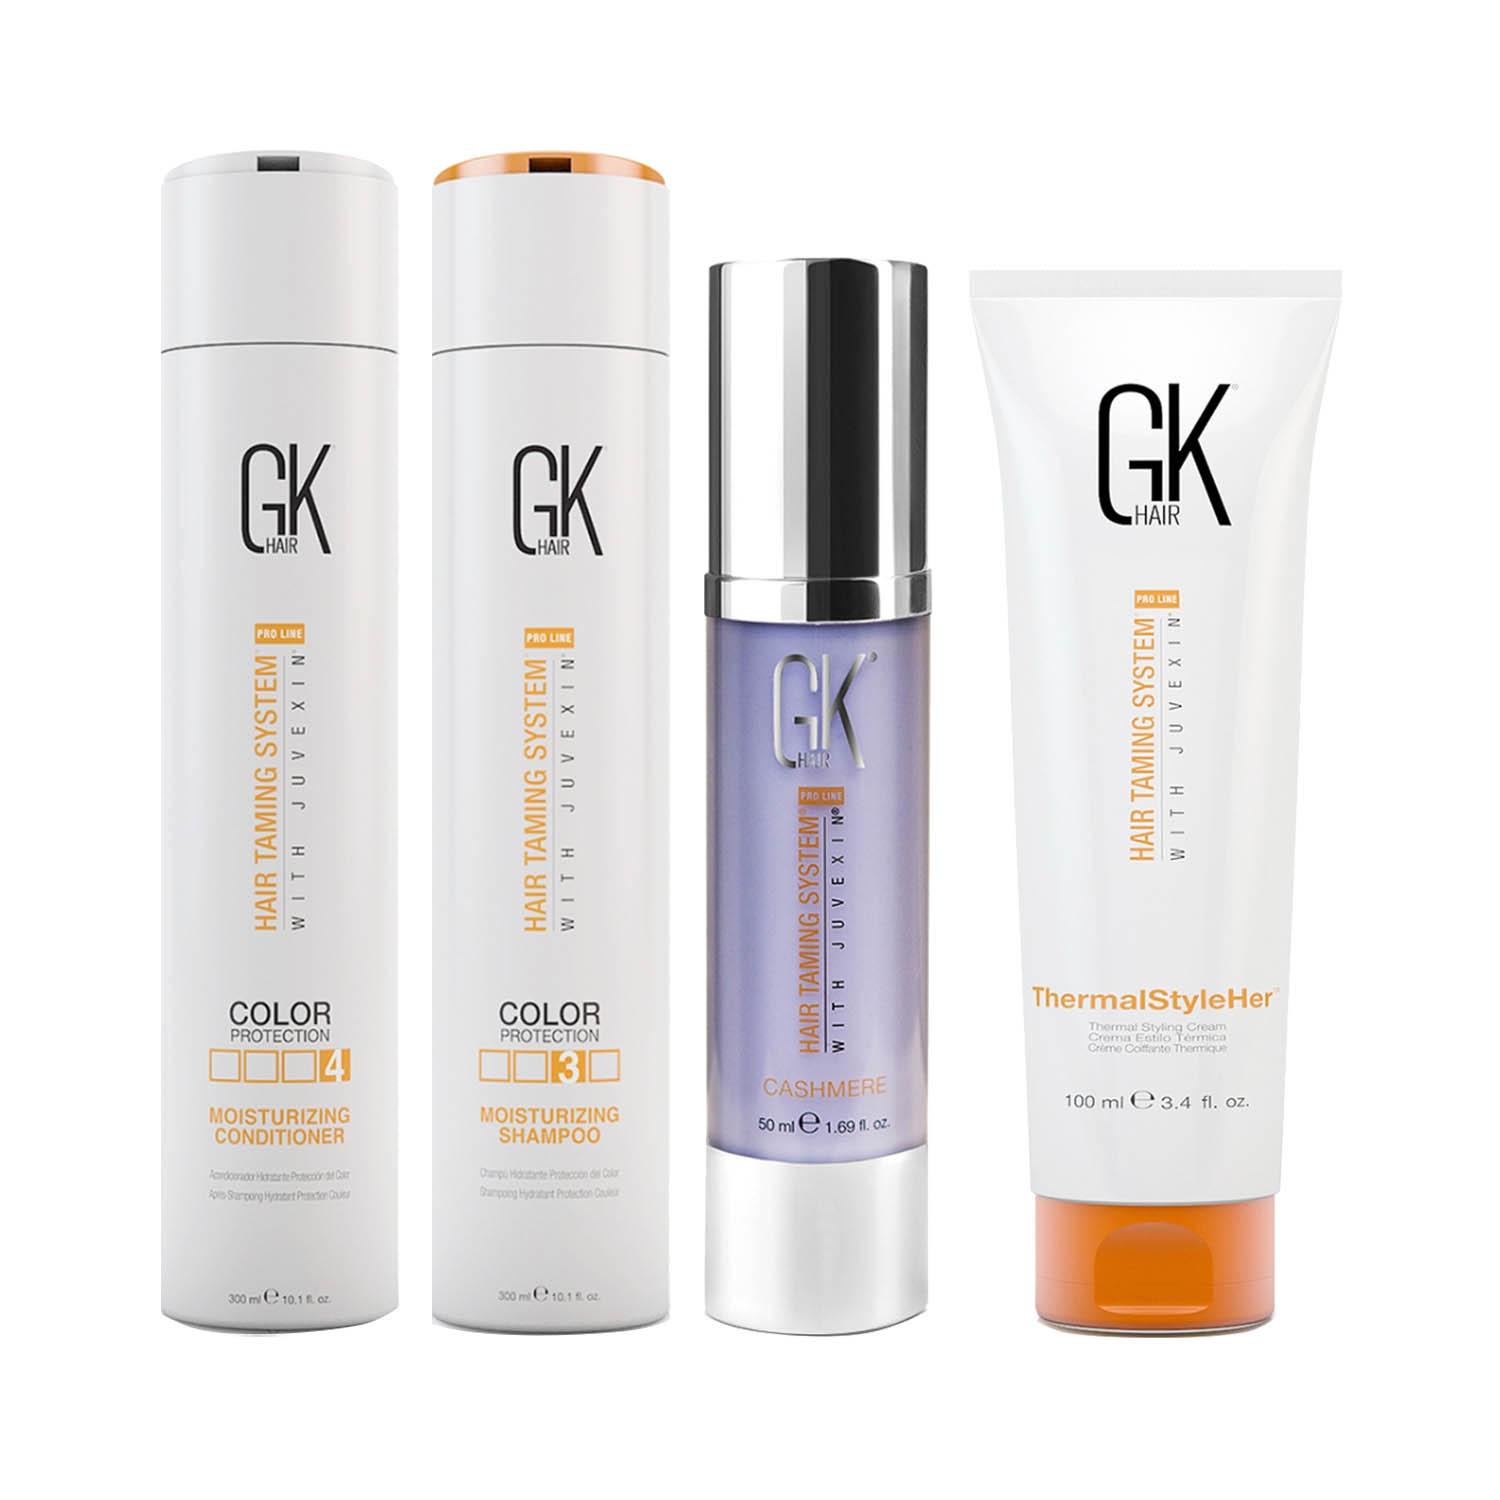 GK Hair Moisturizing Shampoo and Conditioner 300ml with Cashmere 50ml and Thermal styler Cream 100ml